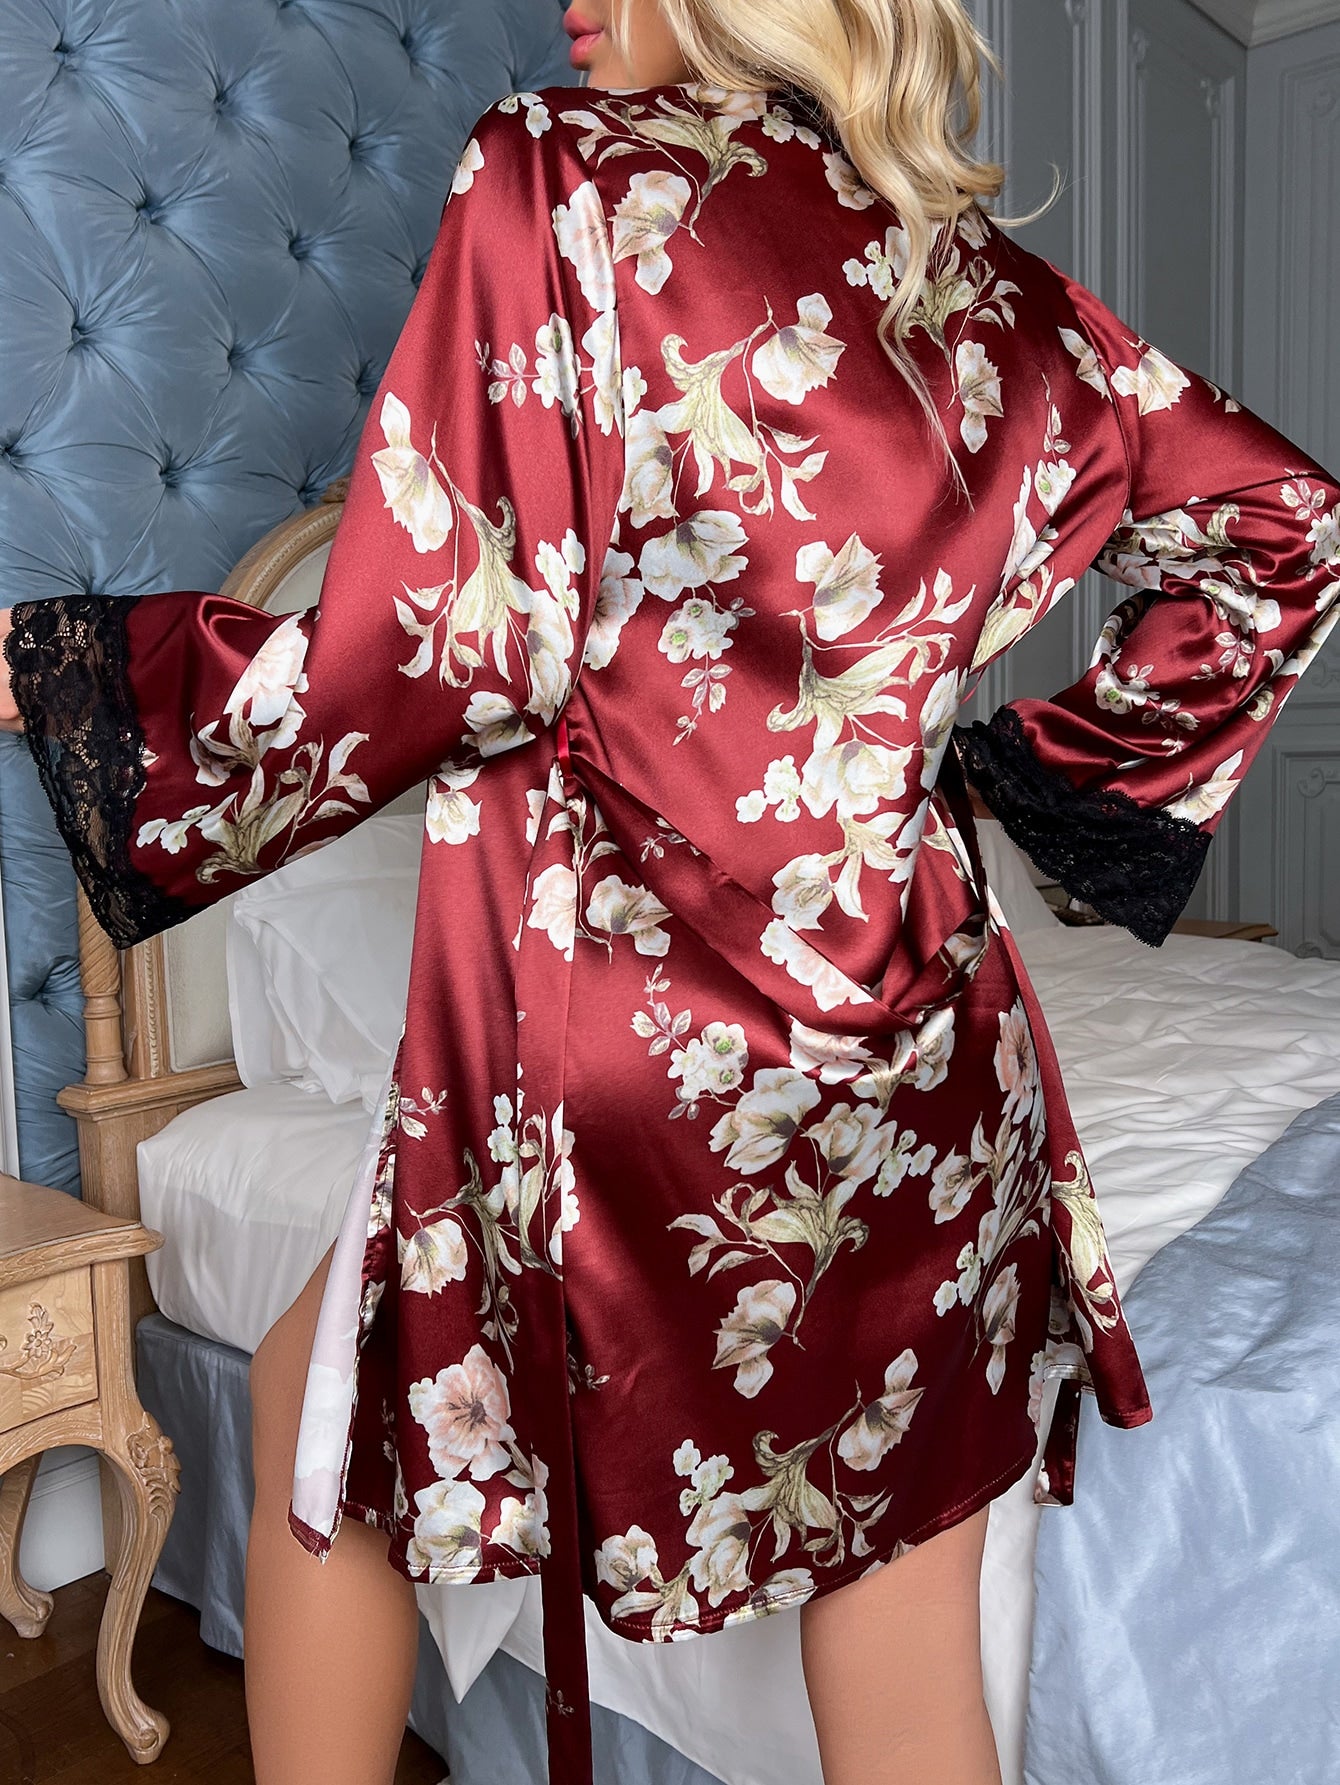 Floral Print Satin Robe with a Lace Trim